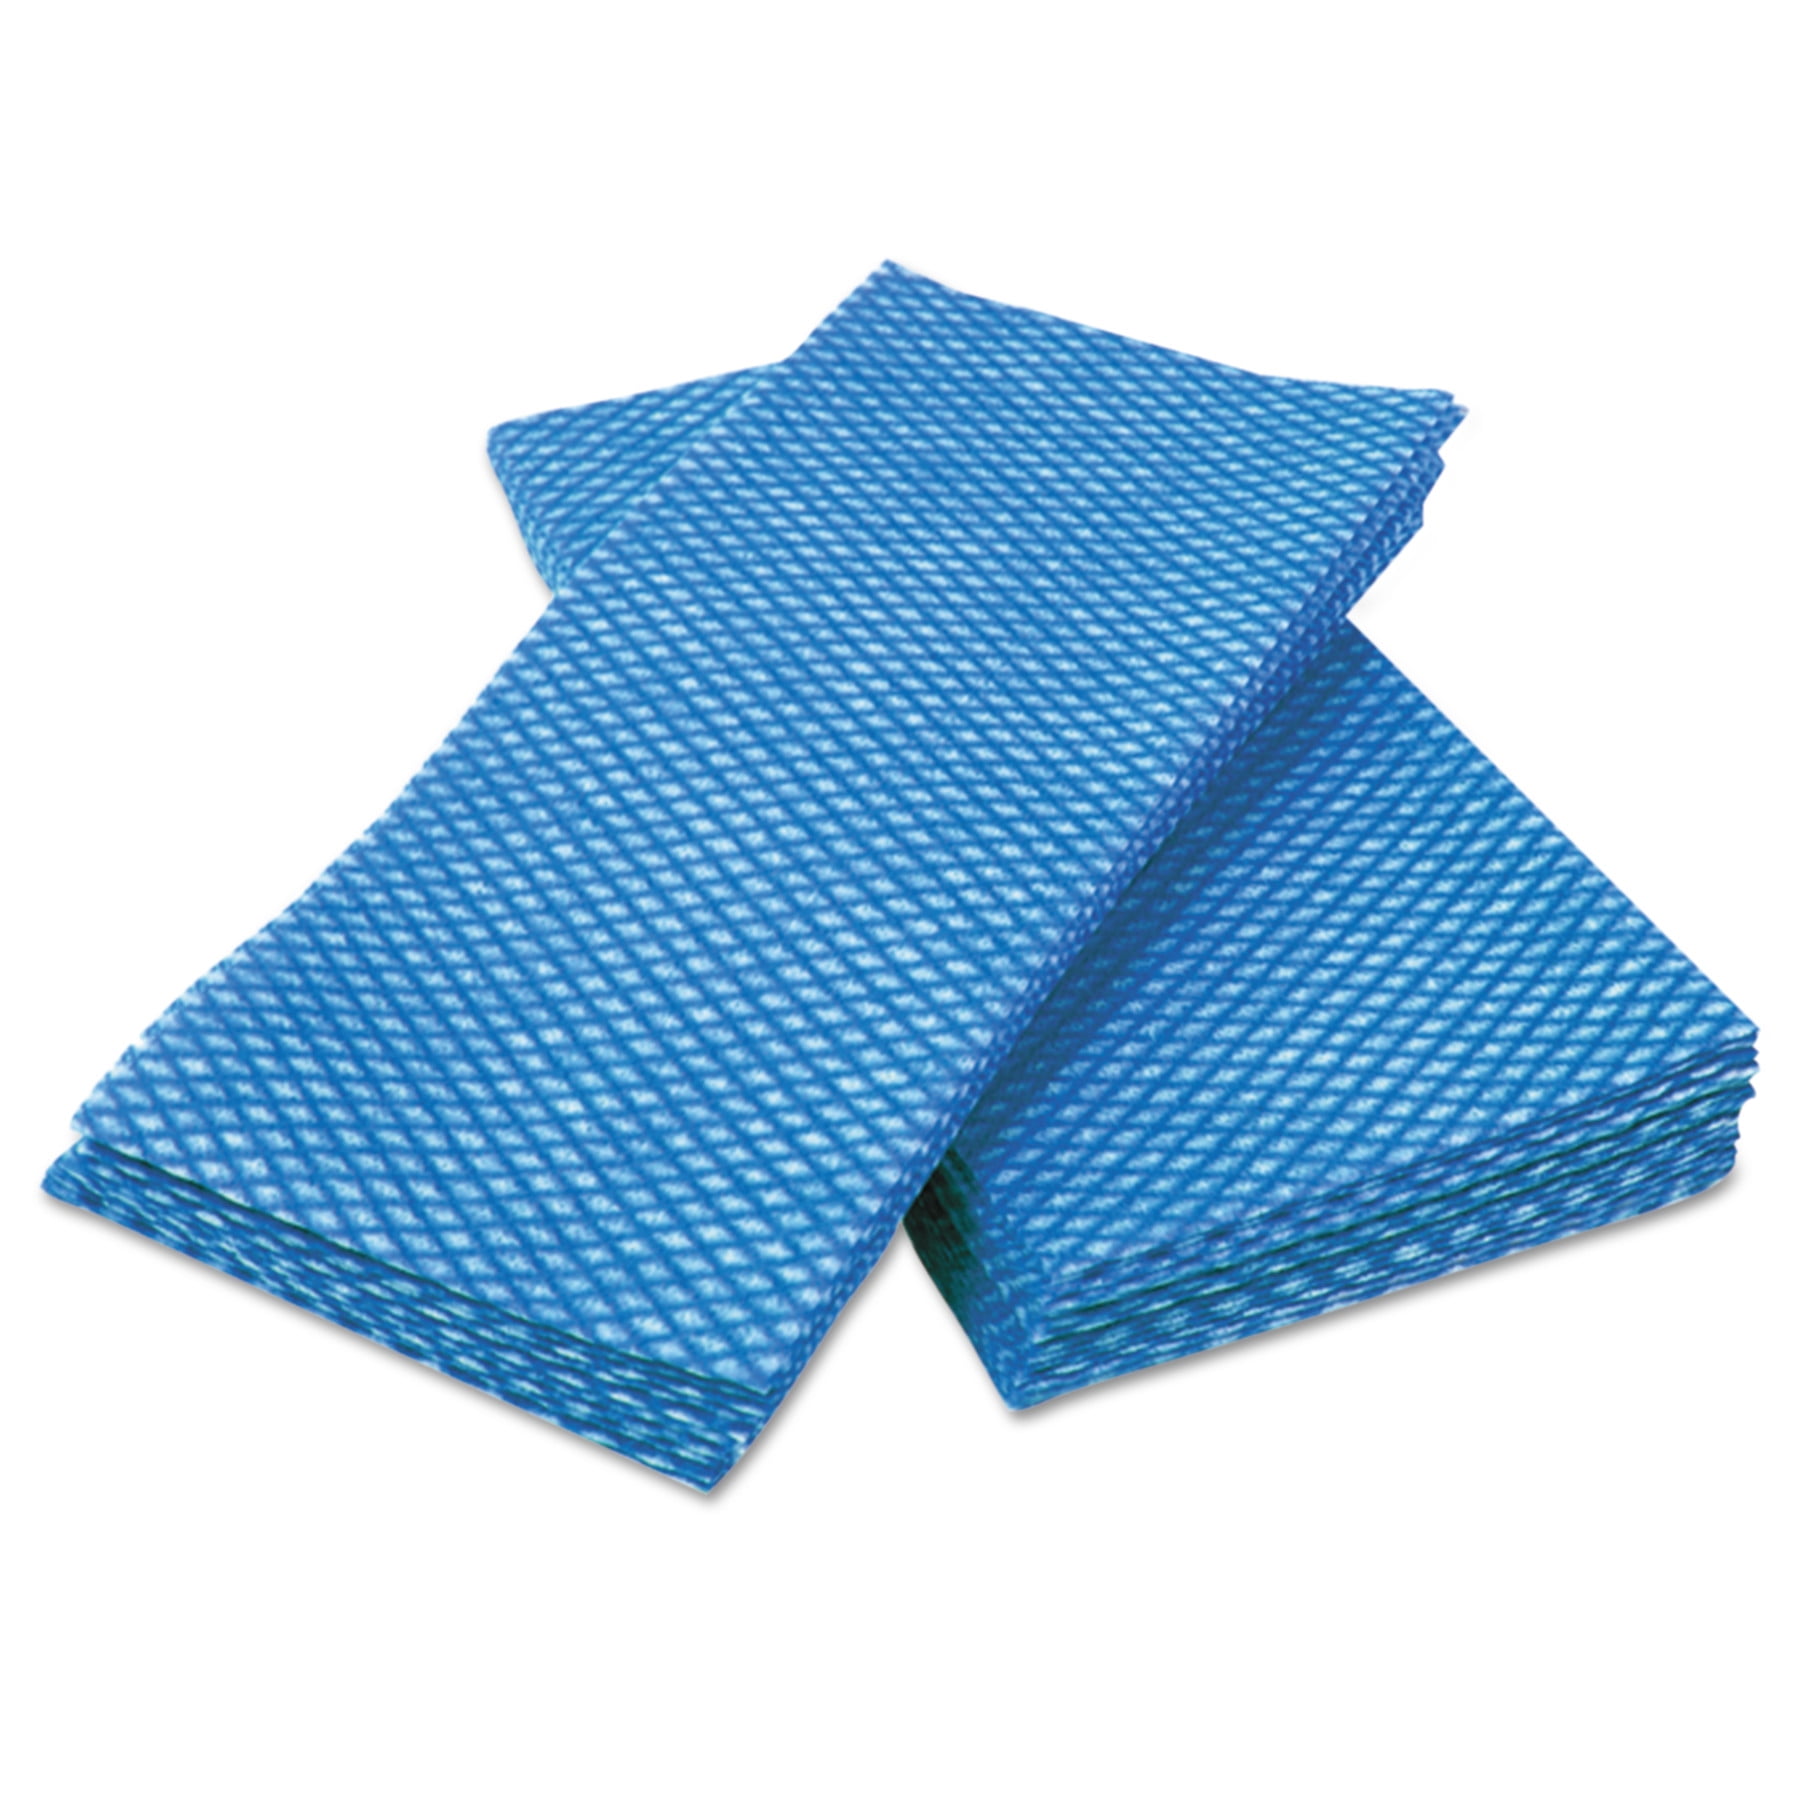 Utopia Blue and White Sustainable Dish Towels, 12 Pack